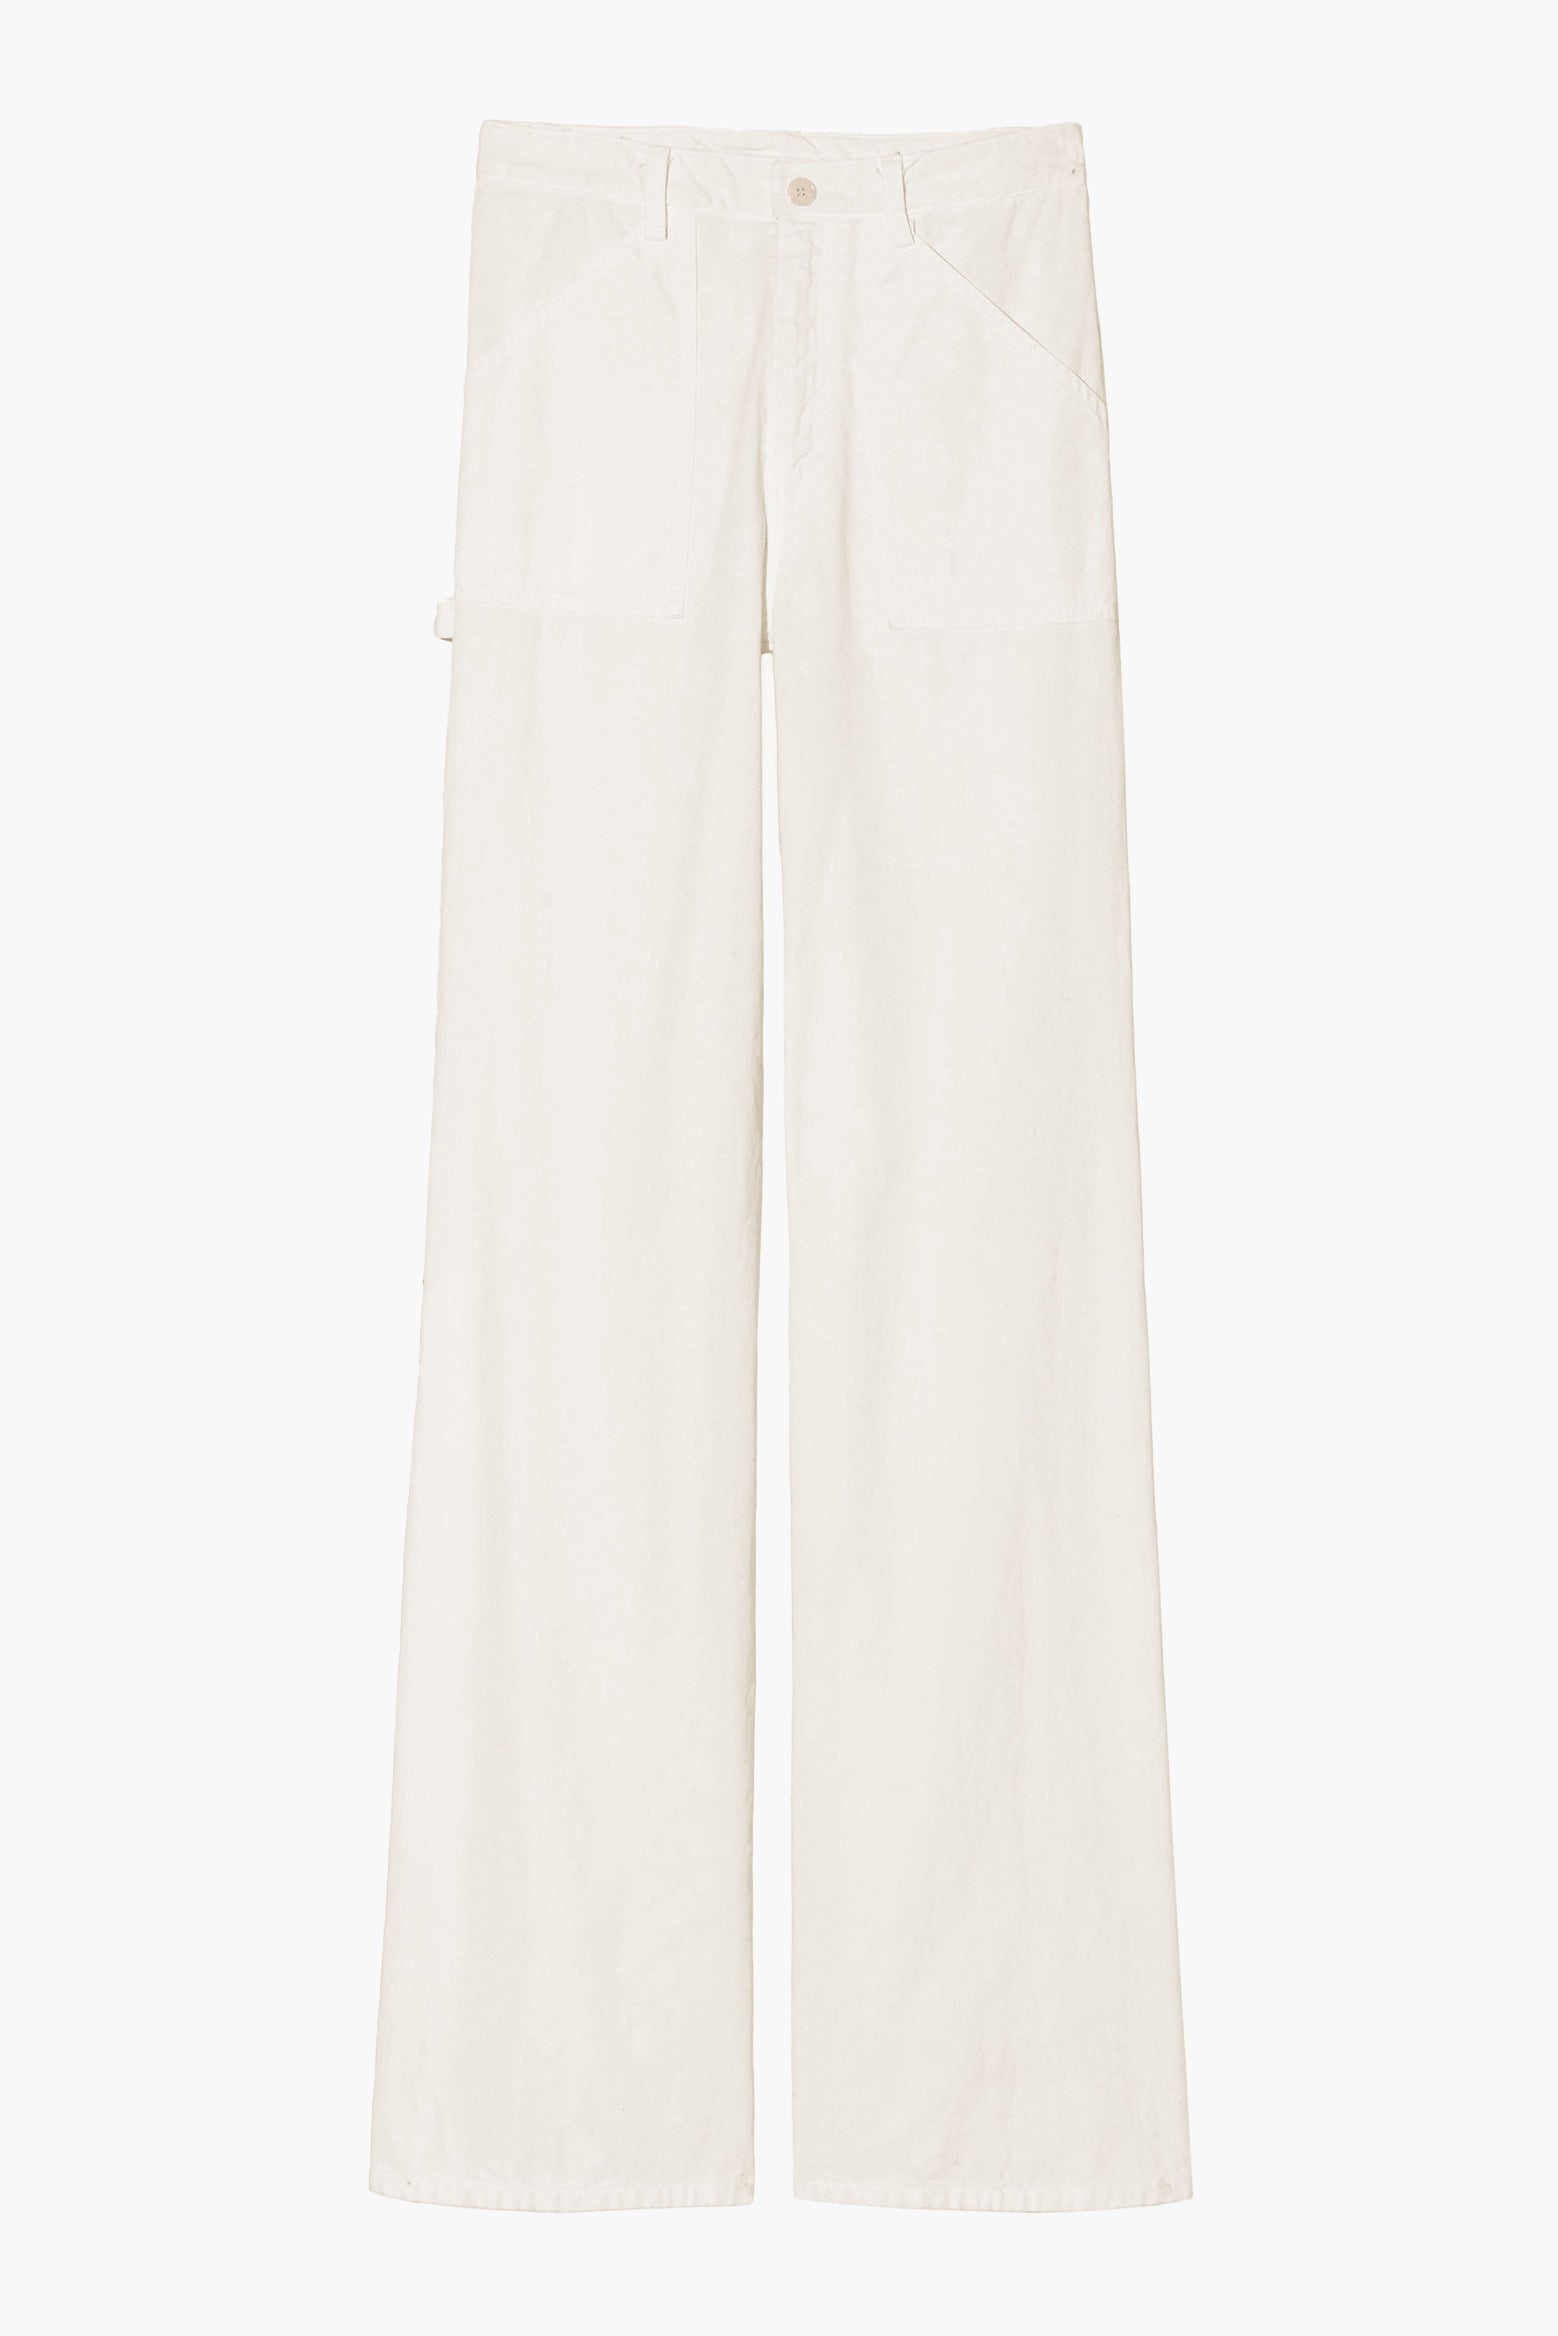 The Nili Lotan Quentin Pant in Stone available at The New Trend Australia